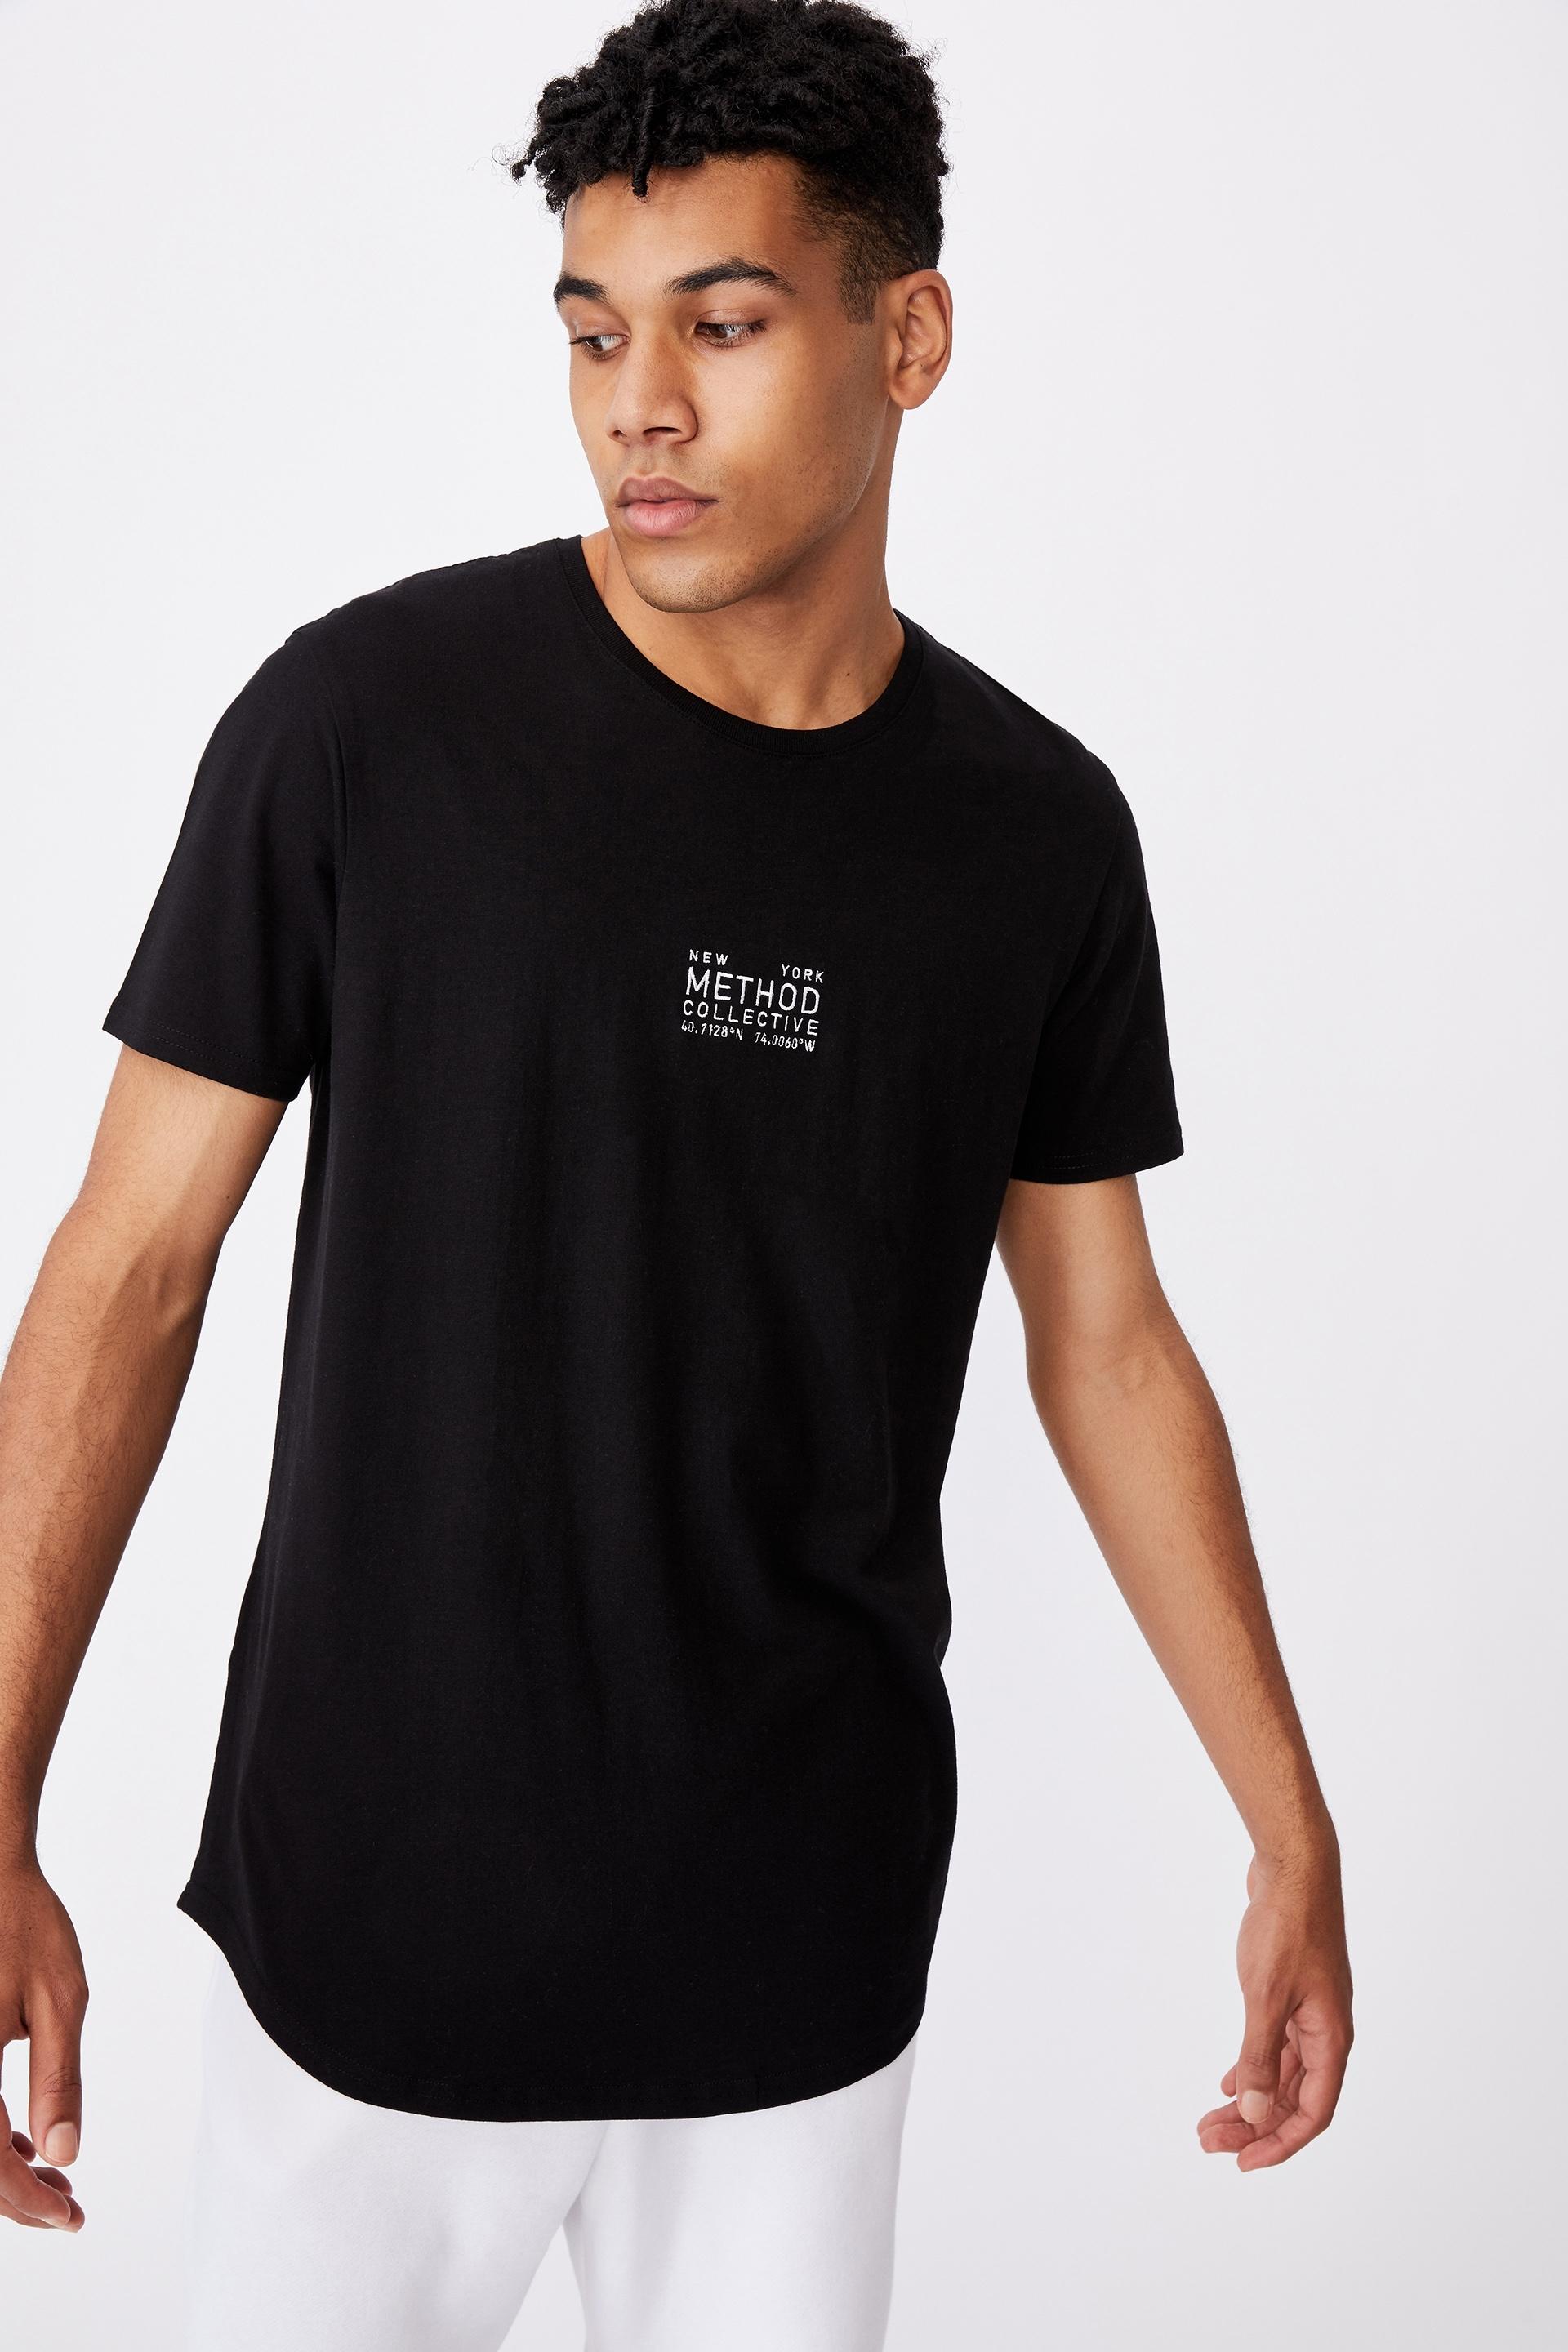 Curved graphic t shirt - black/method collective Factorie T-Shirts ...